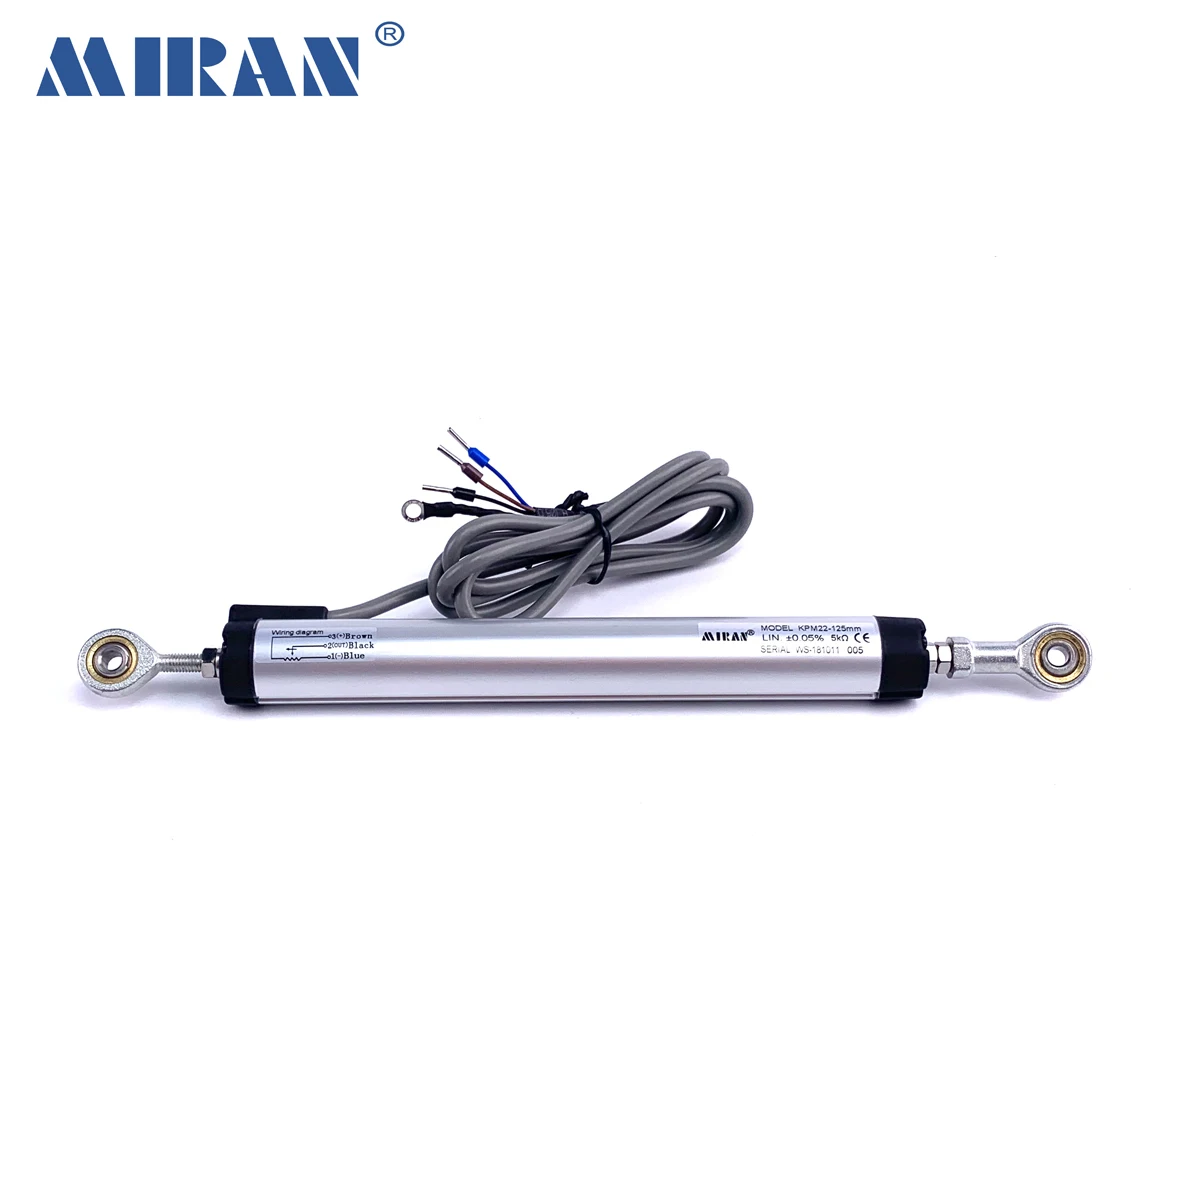 

Miran Articulated Electric Ruler with 2 Ball Joint KPM22 100mm-300mm Hot Sell Diameter 22mm Linear Position Sensor